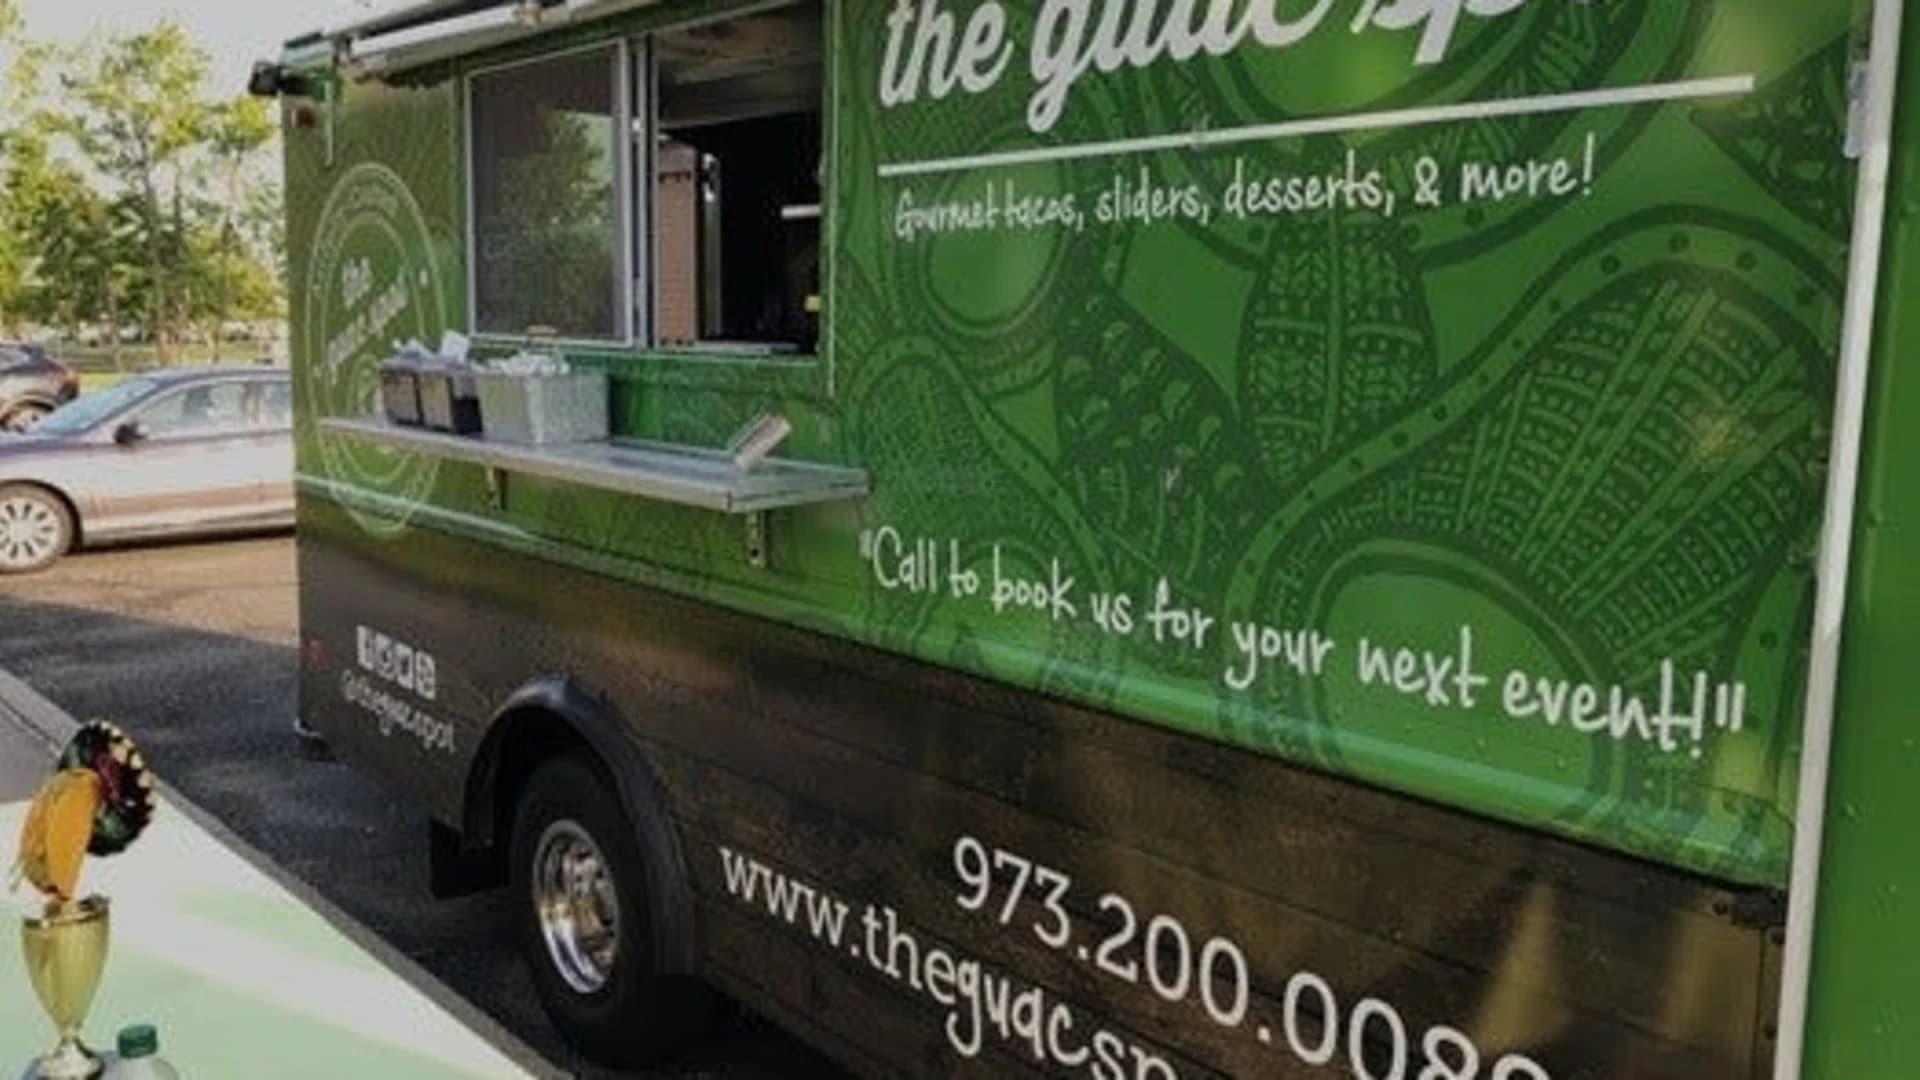 Food Truck Friday: The Guac Spot